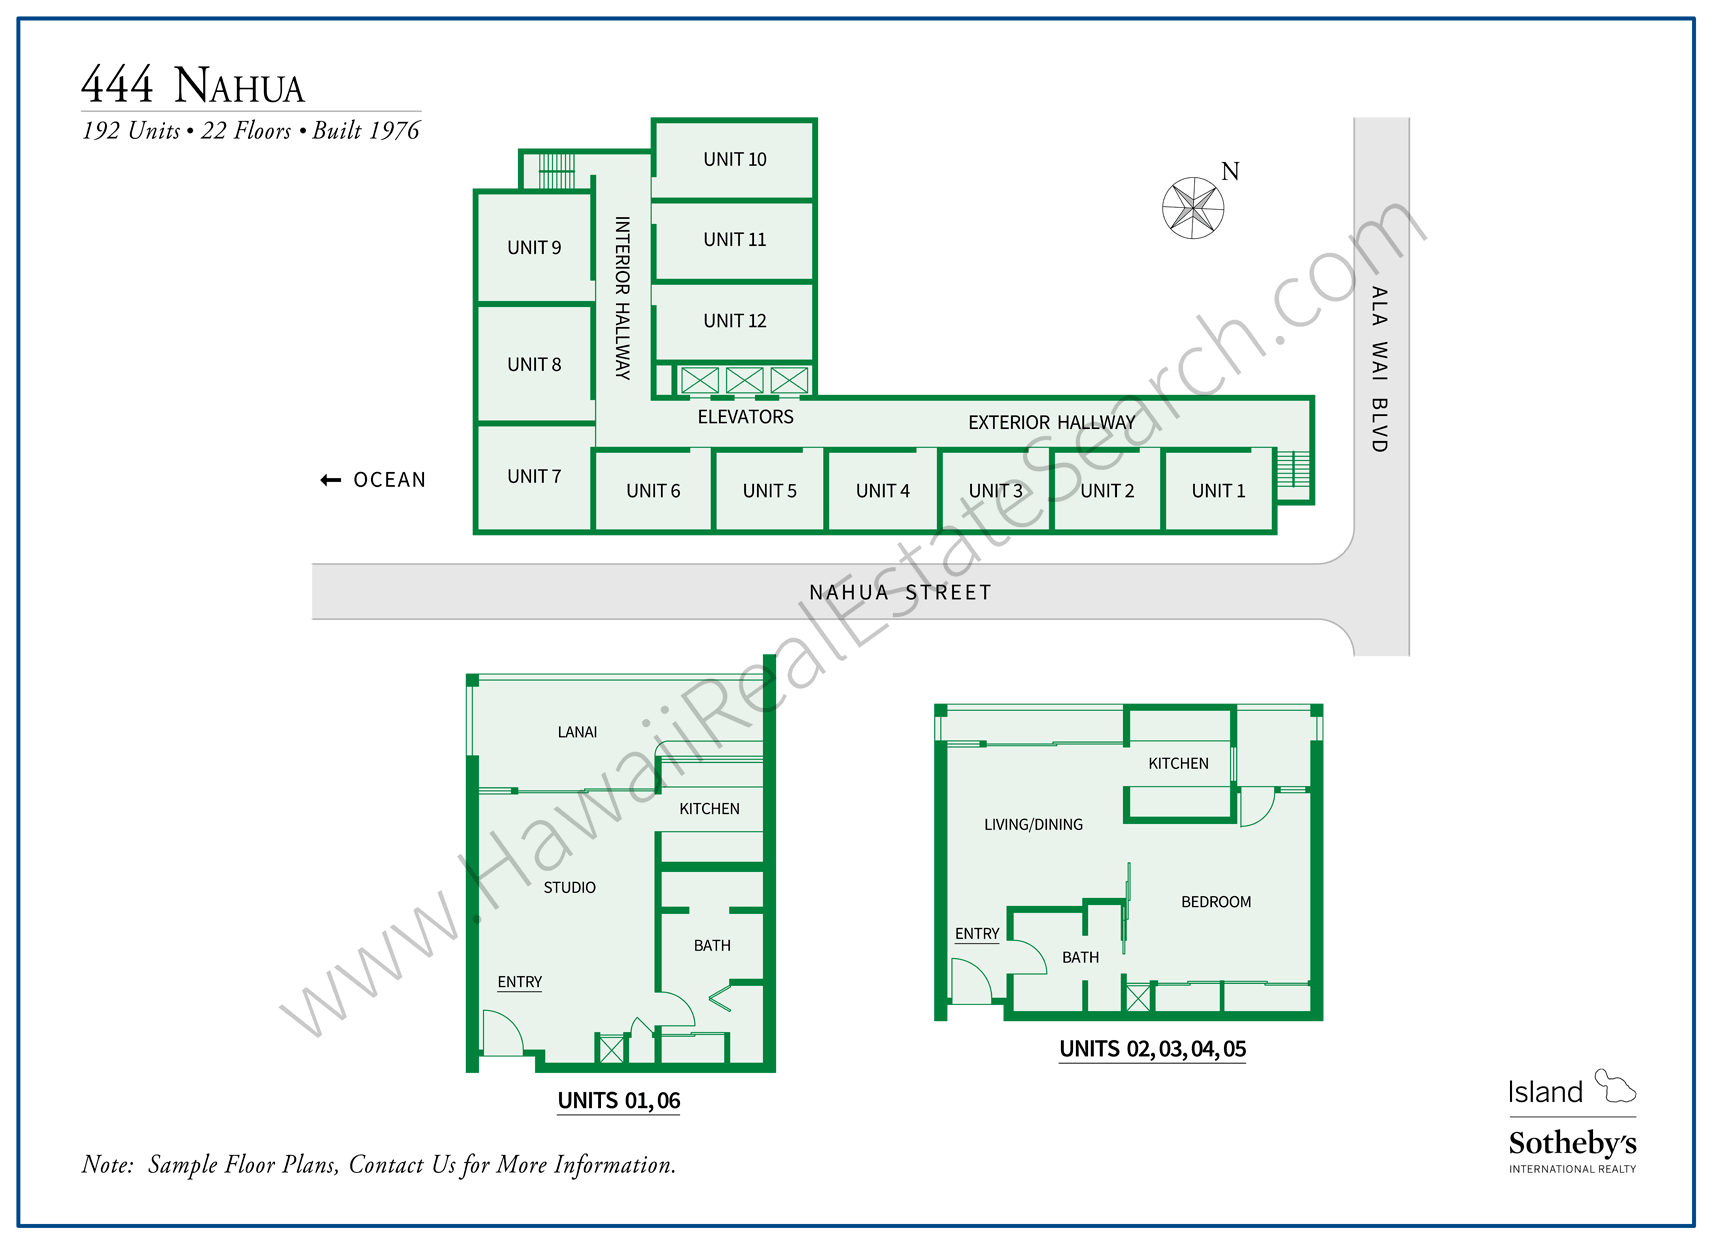 444 Nahua Property Map and Floor Plans